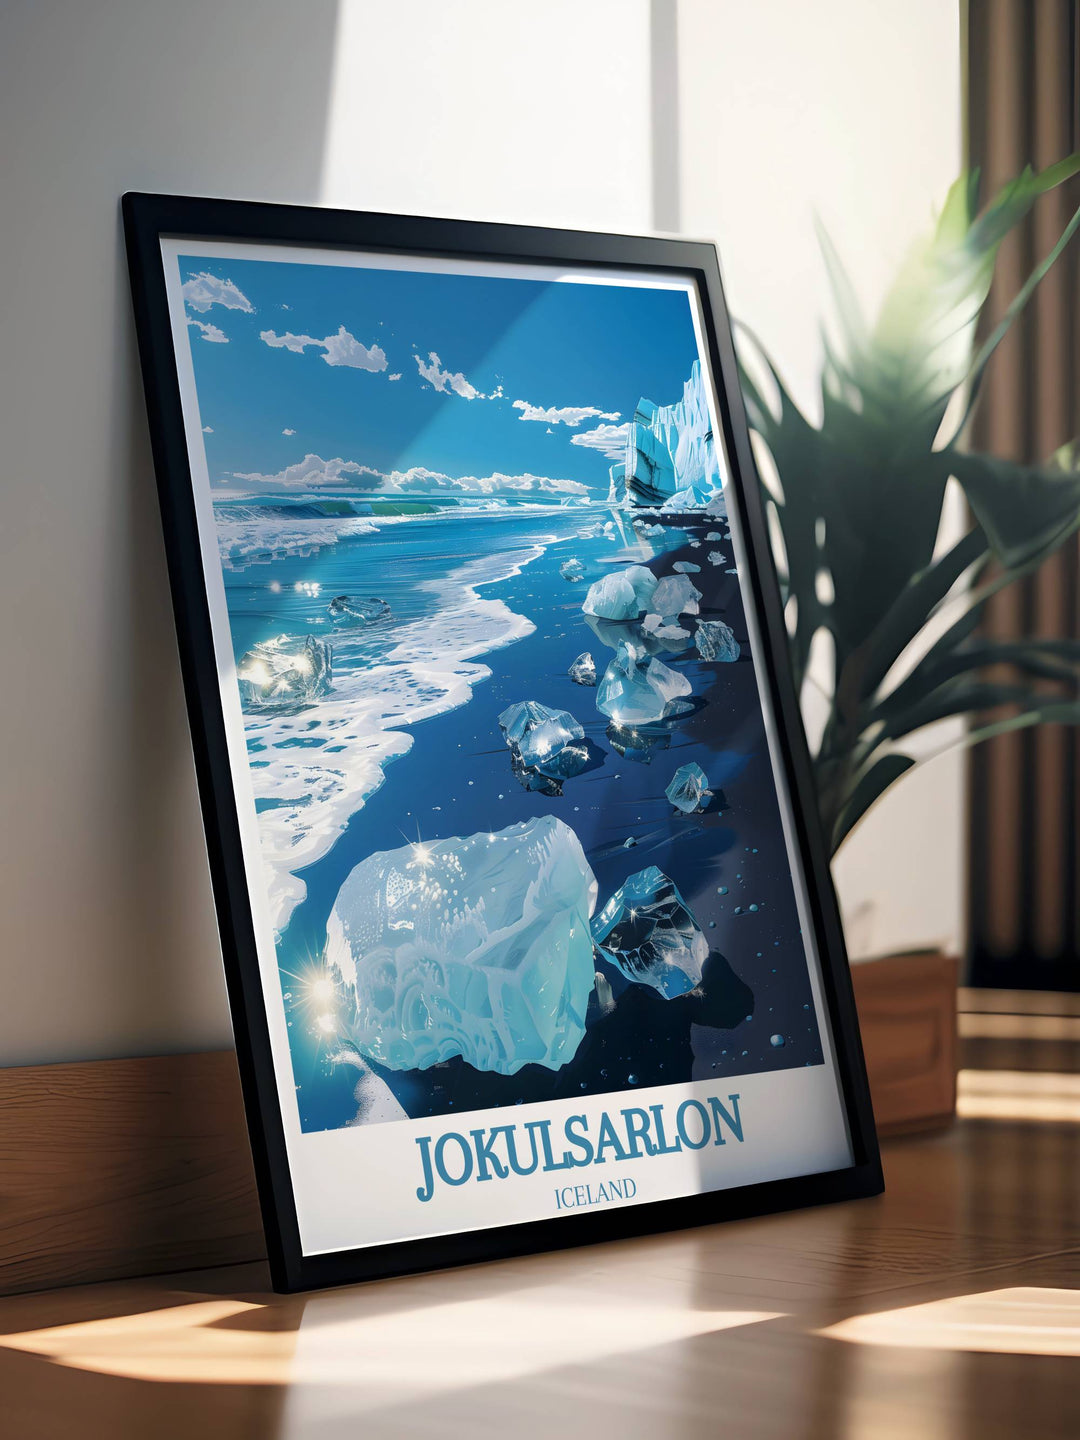 Elevate your home décor with this Europe travel poster gift, showcasing the stunning landscape of Diamond Beach jokulsarlon and the majestic Jokulsarlon Glacier Lagoon